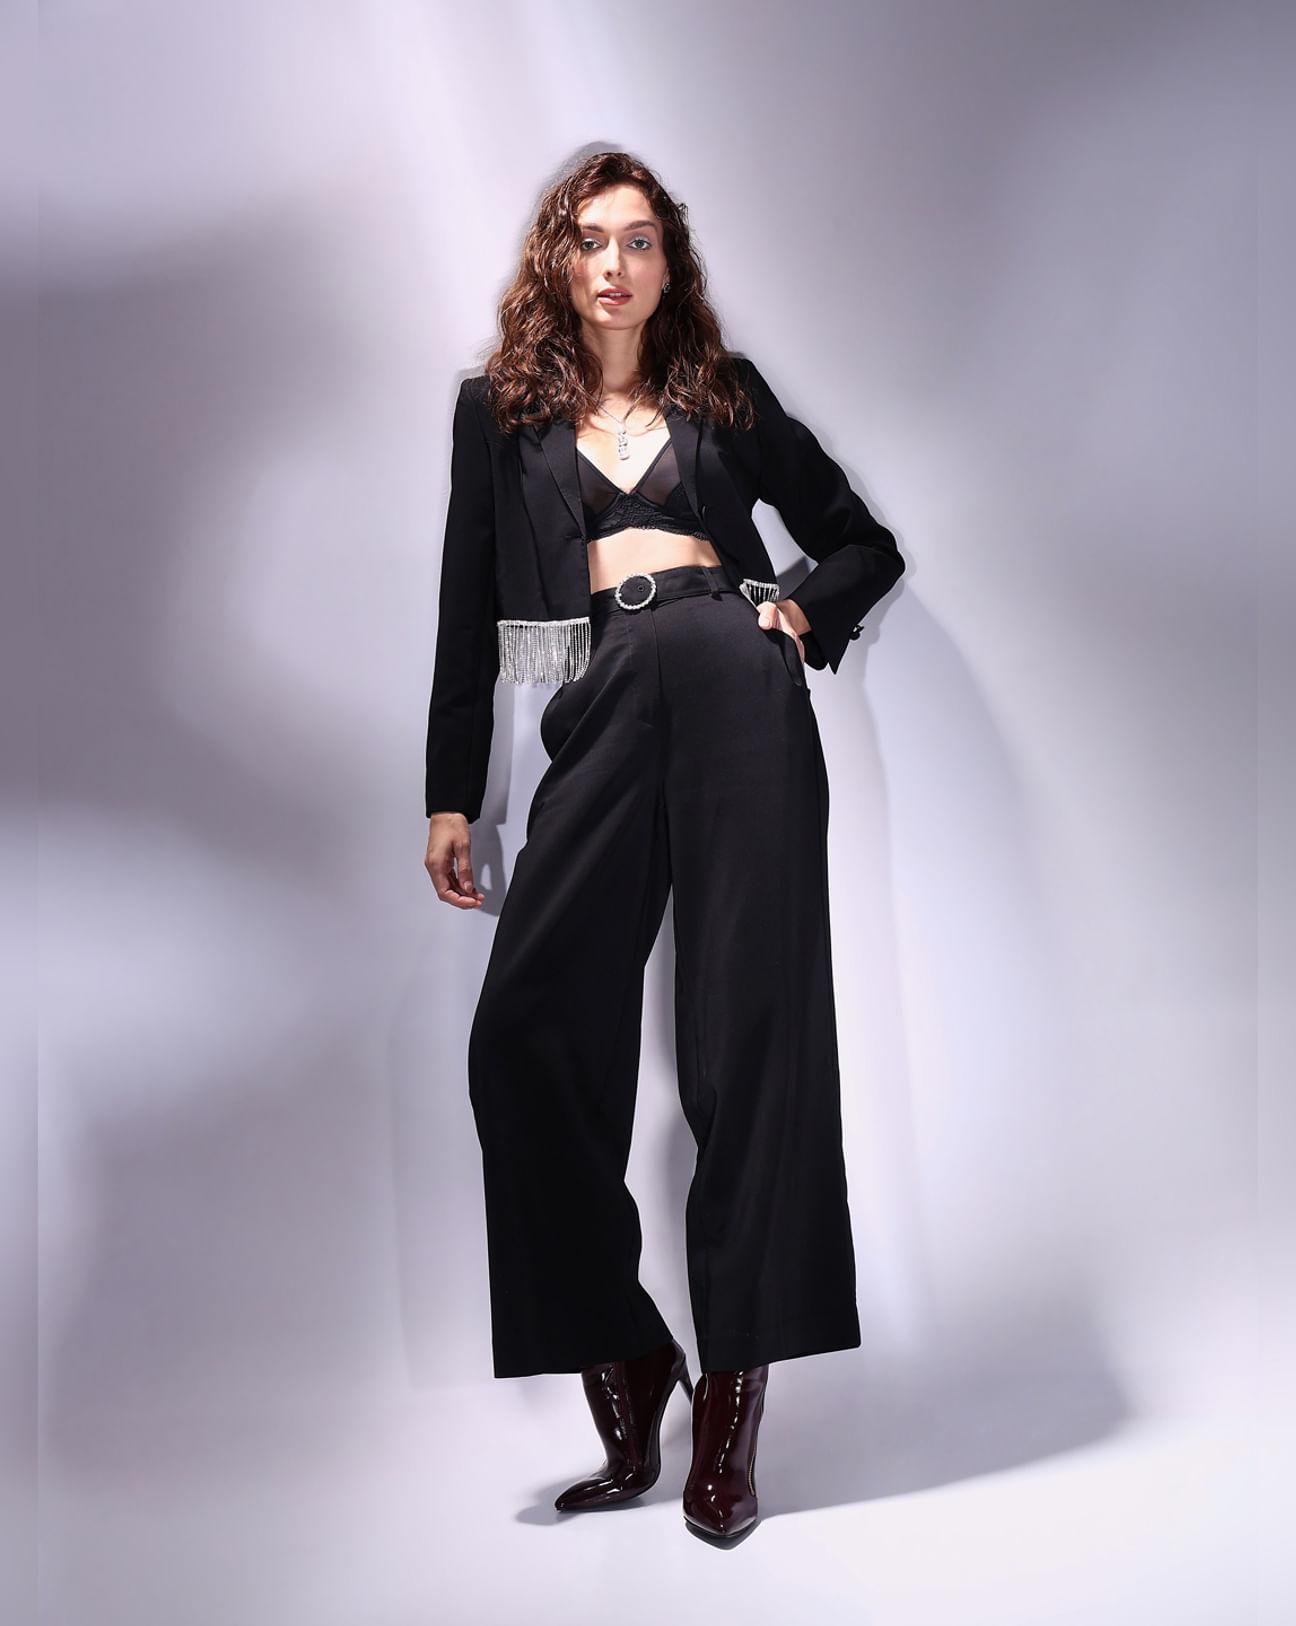 marquee black high rise embellished buckle pants